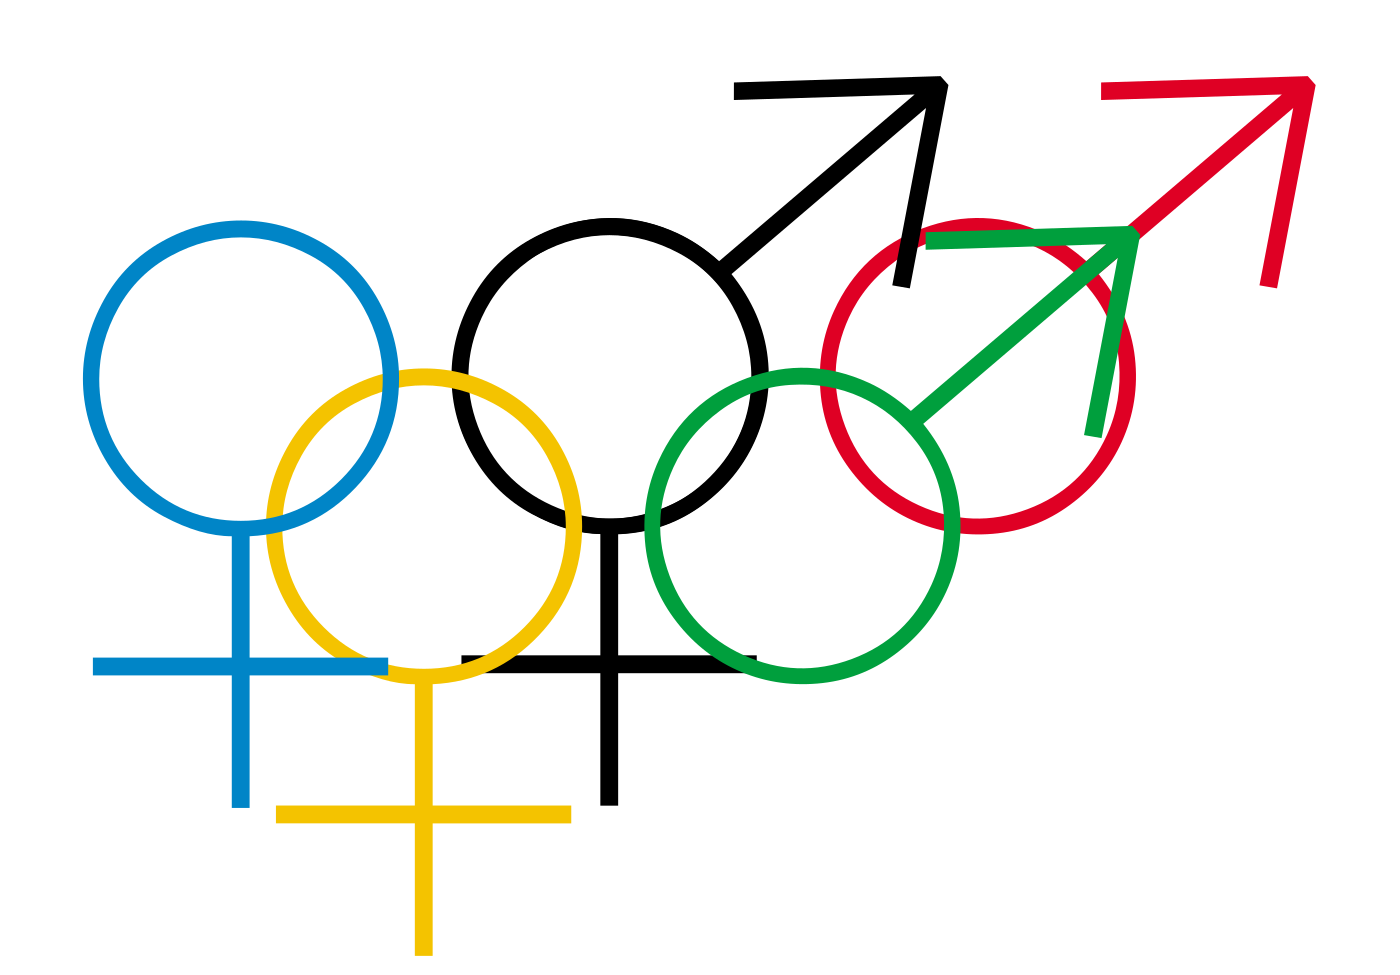 Image showing gender symbols. © Nevit Dilmen [CC BY-SA 3.0 (https://creativecommons.org/licenses/by-sa/3.0) or GFDL (http://www.gnu.org/copyleft/fdl.html)], from Wikimedia Commons.